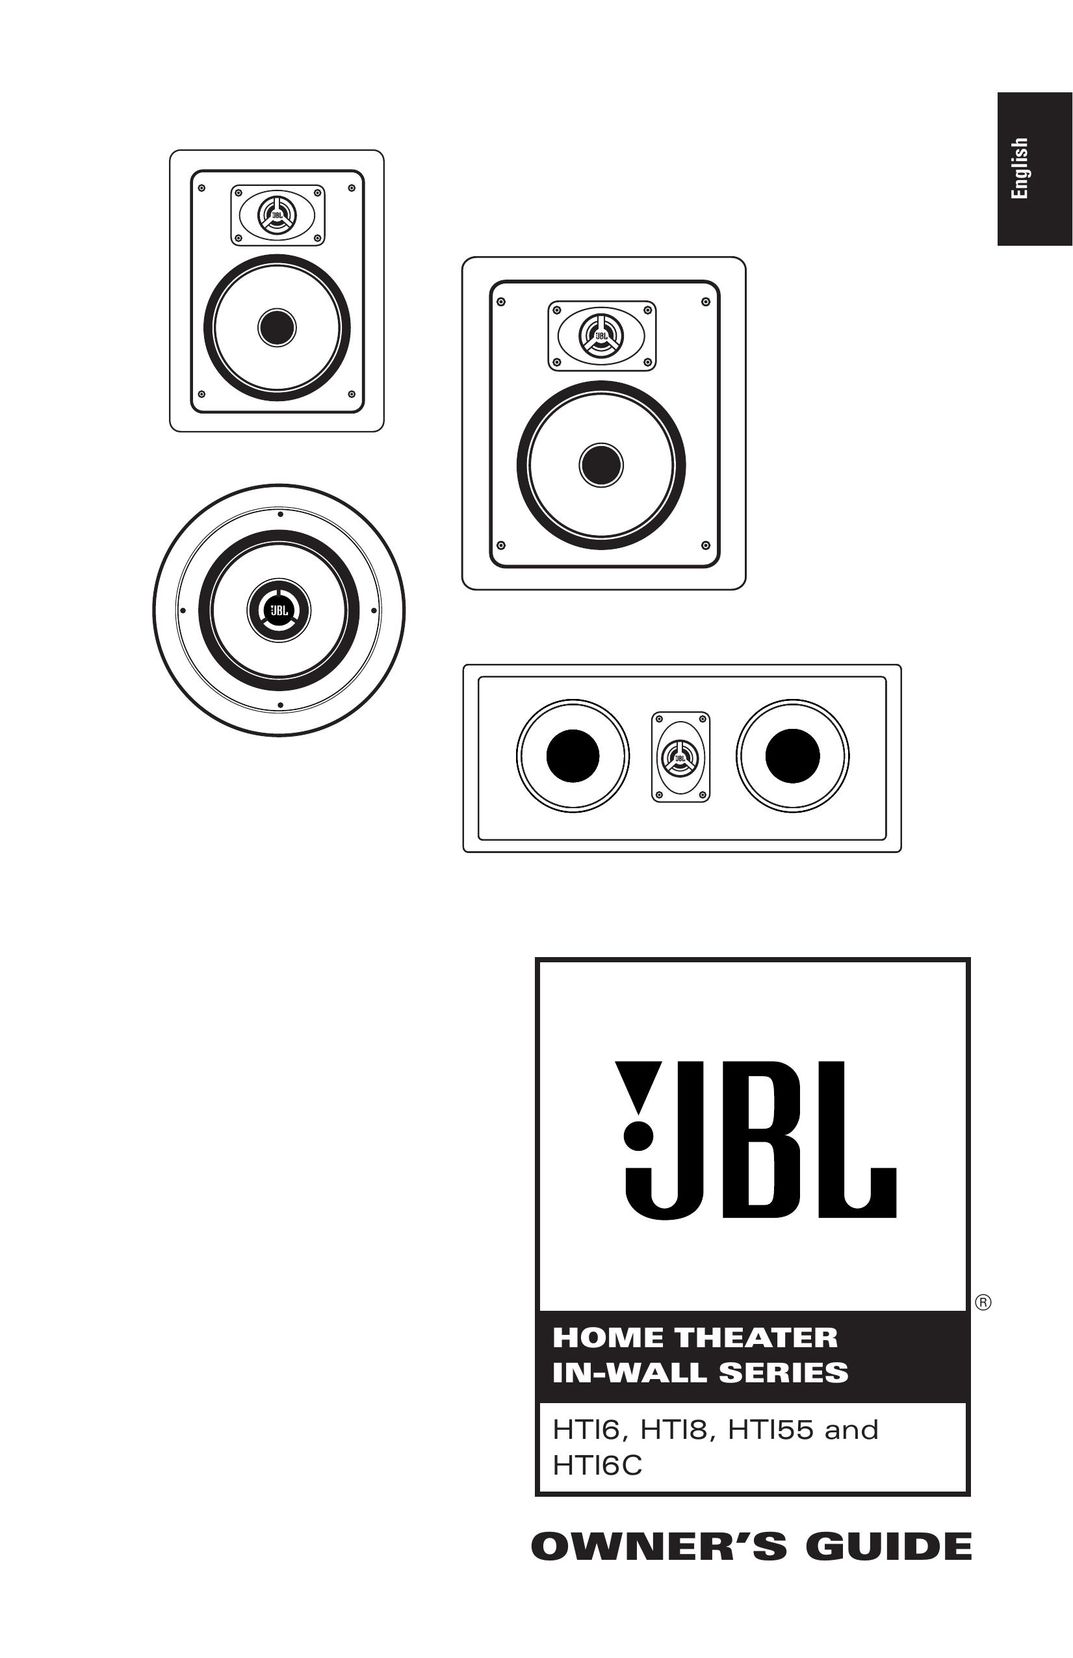 JBL HT18 Home Theater System User Manual